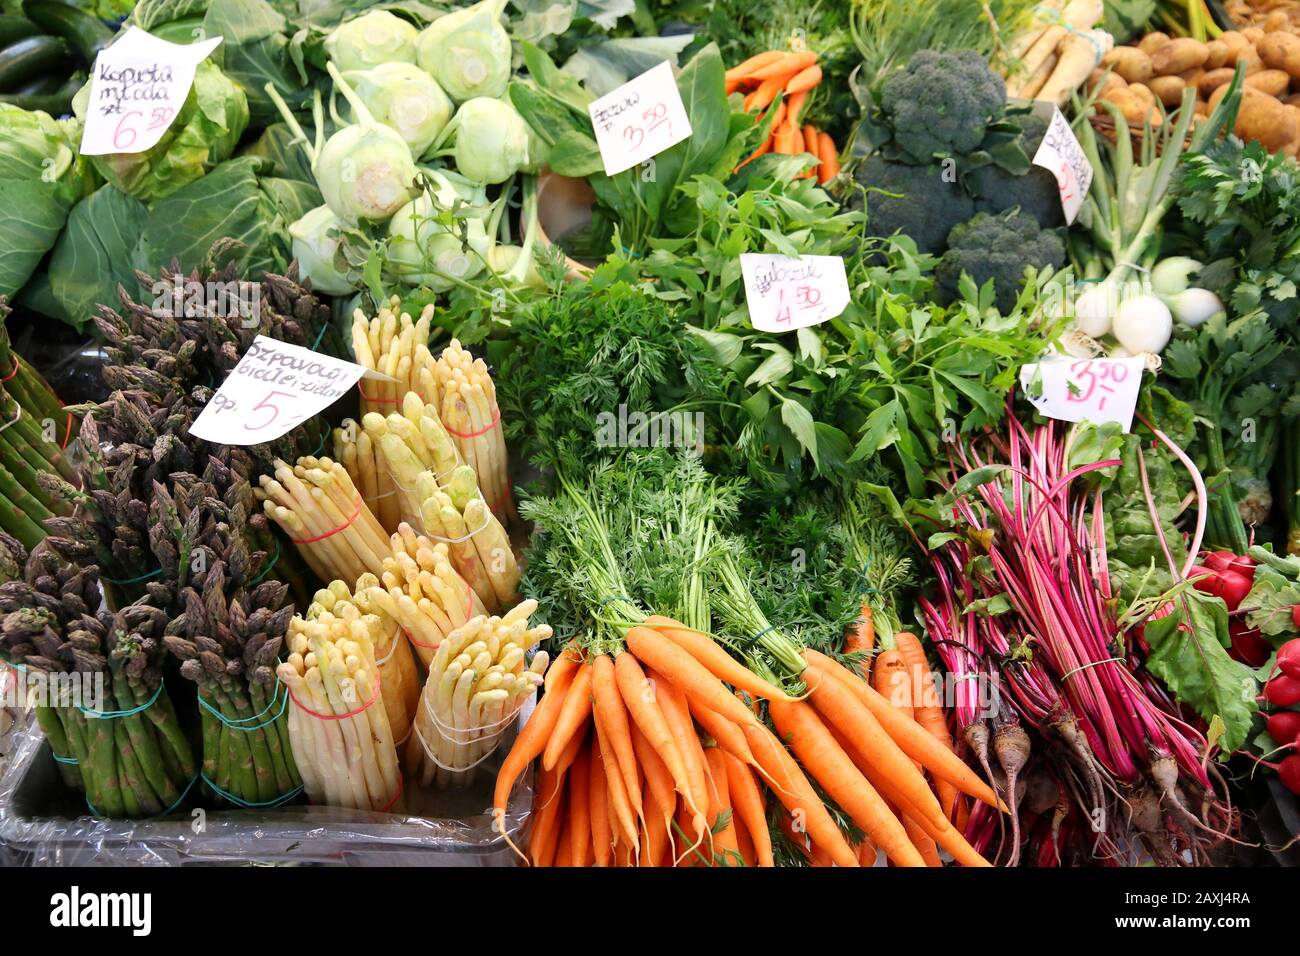 Food marketplace in Poland - Wroclaw Market Hall vegetables. Stock Photo